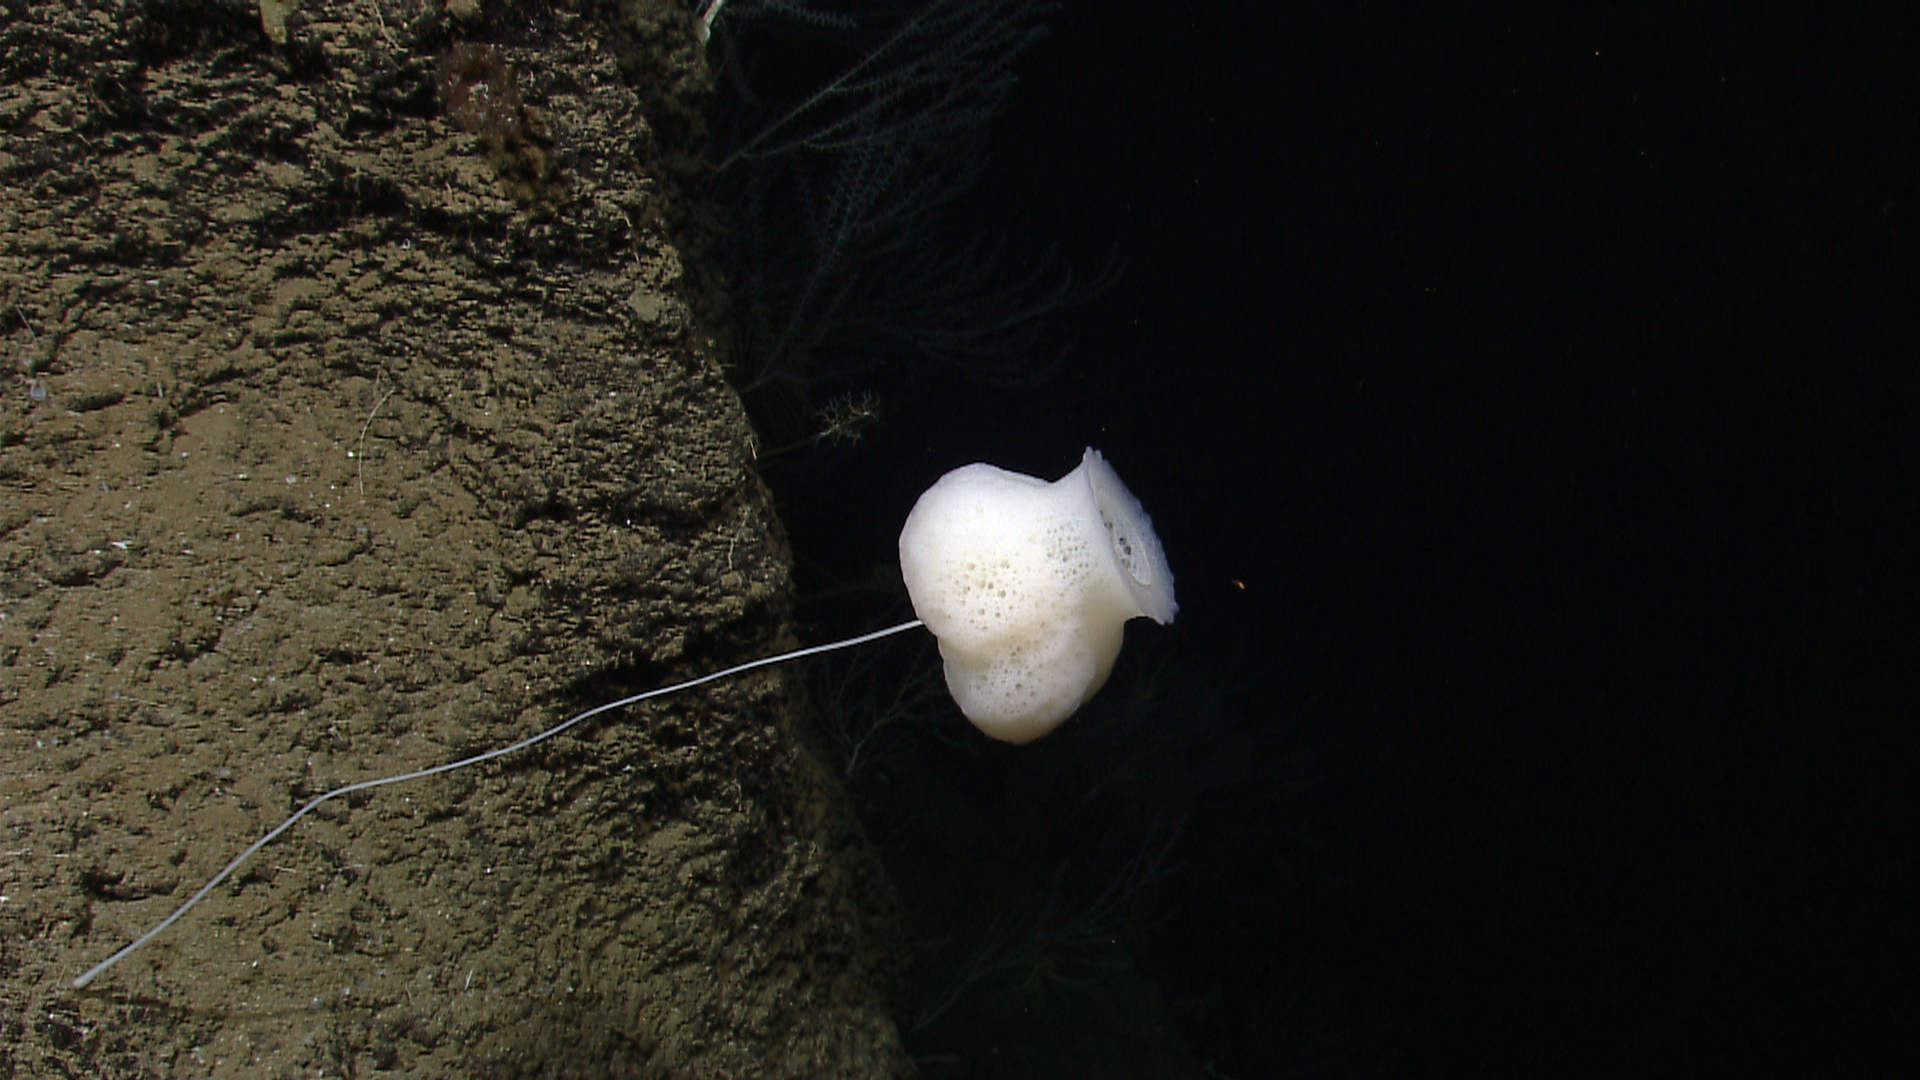 Photograph of a stalked glass sponge